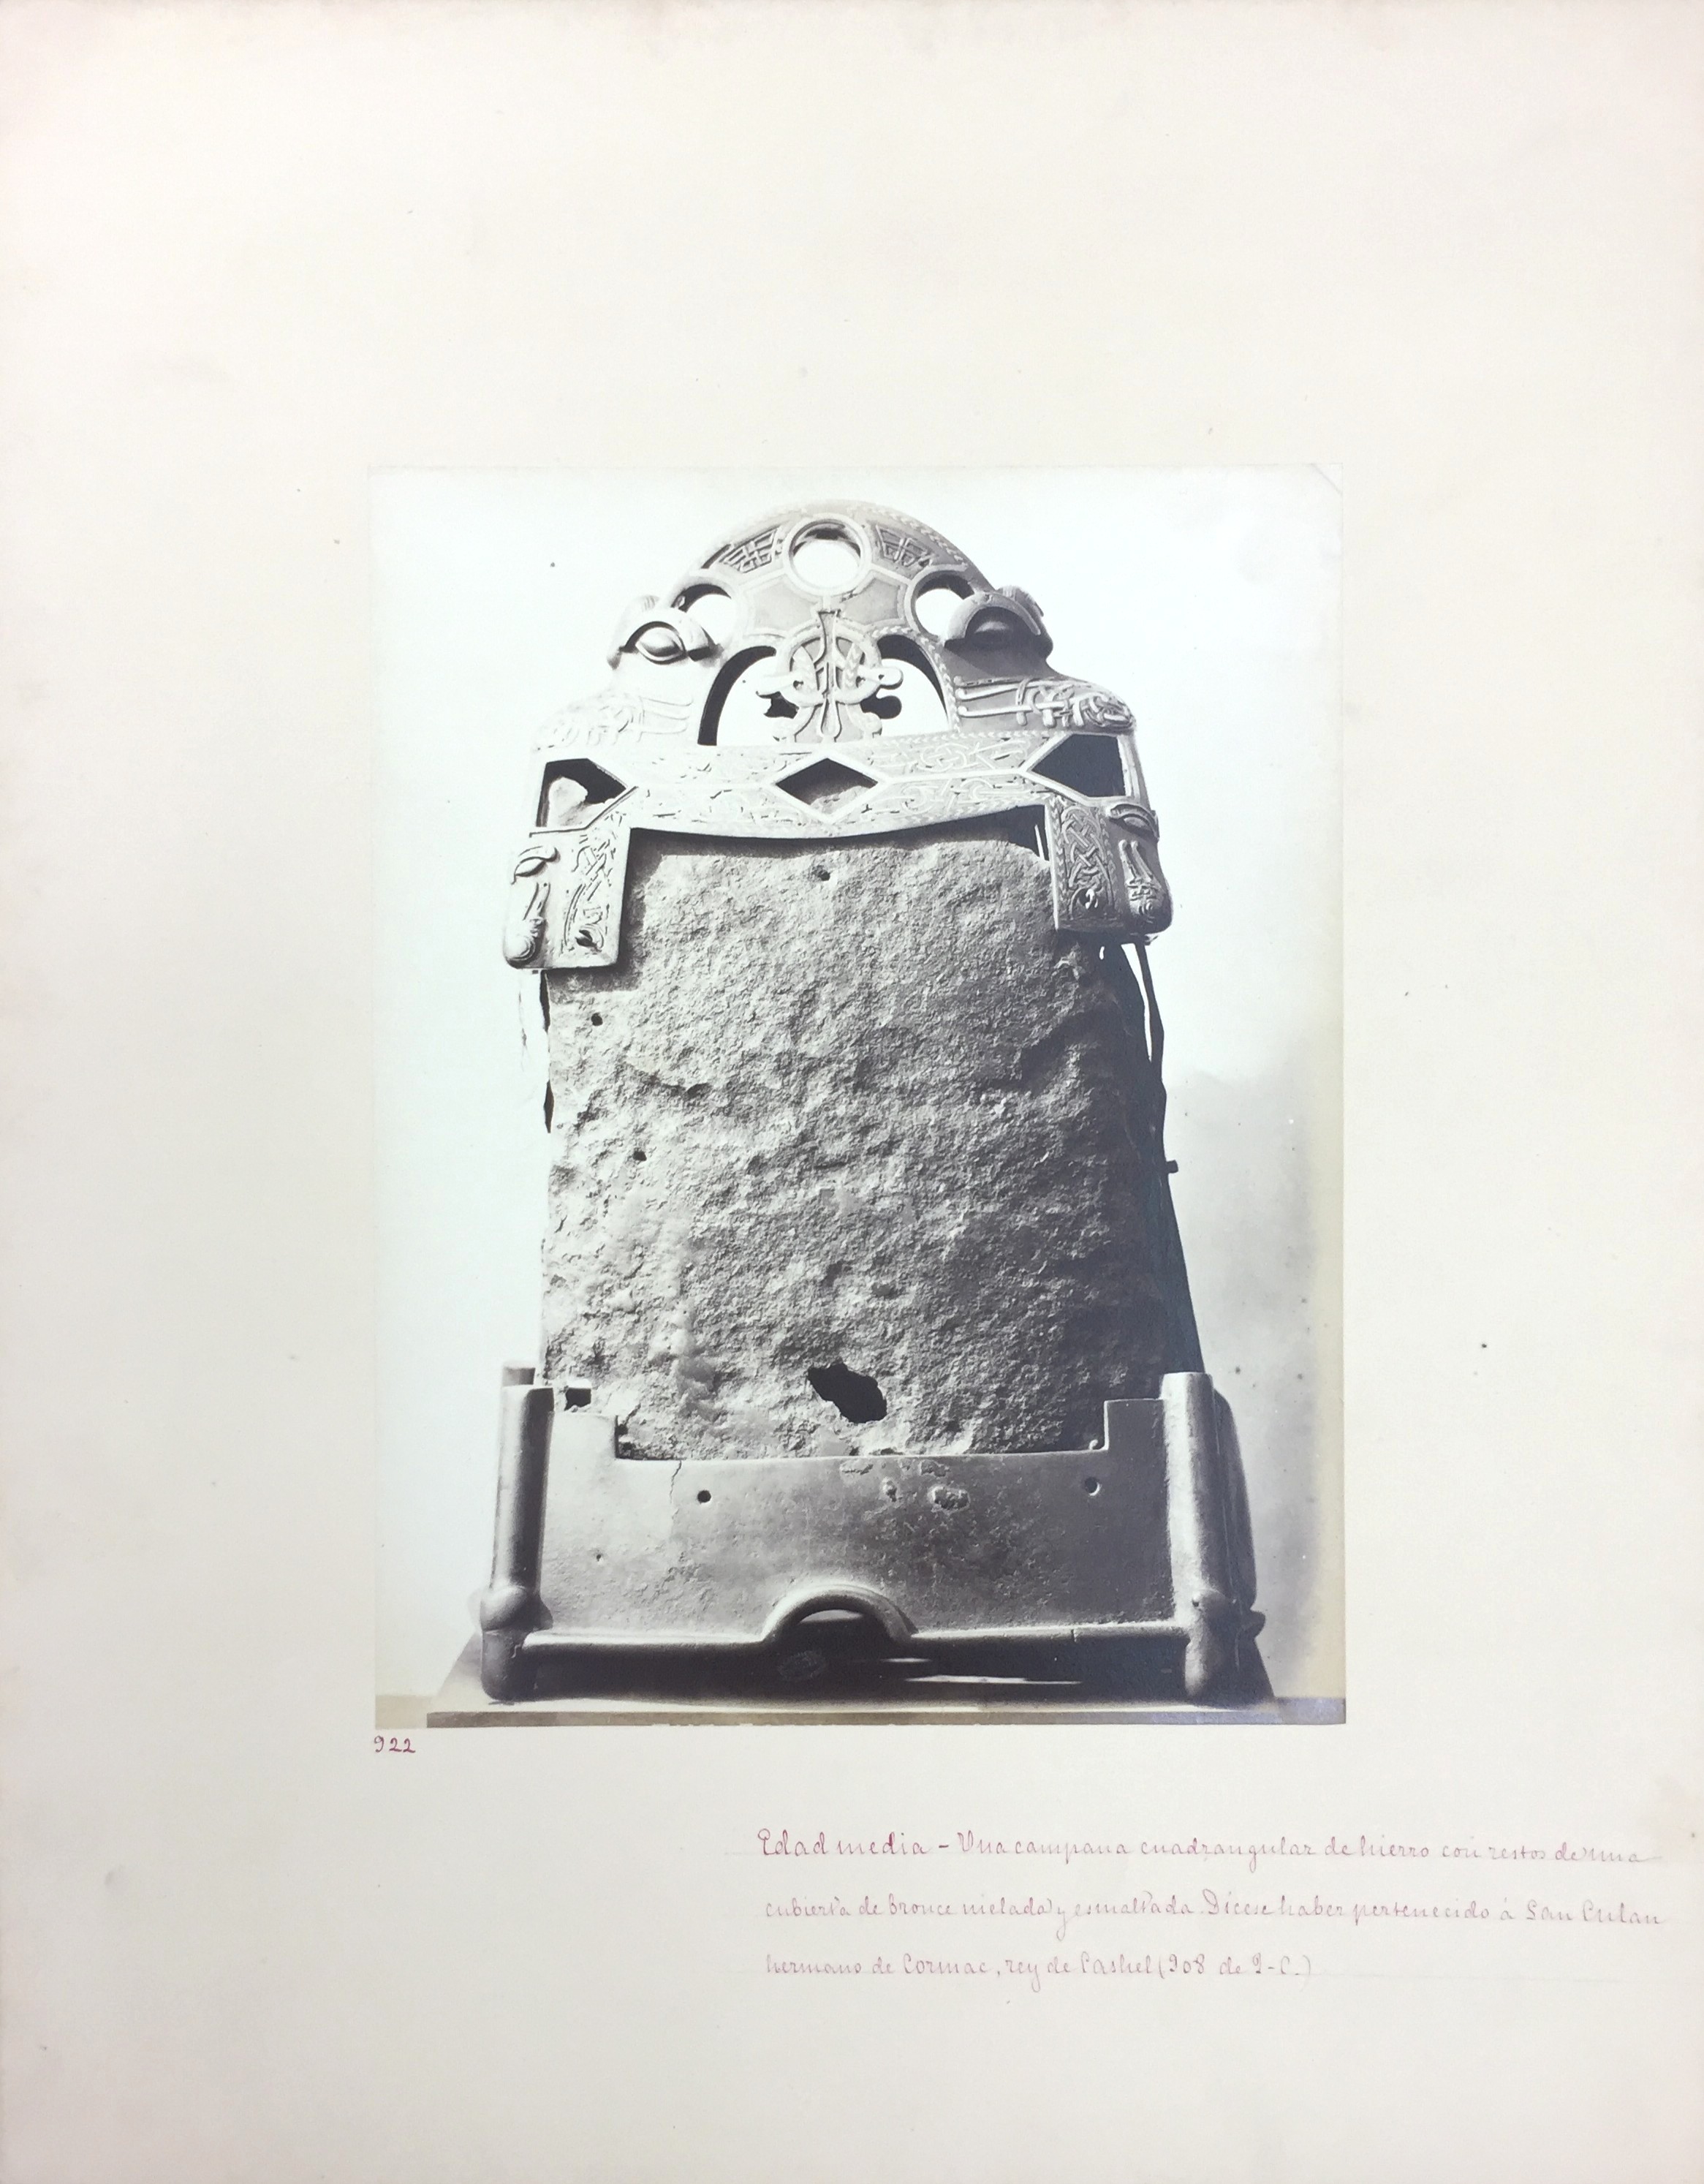   Medieval Iron Bell, 12th C, No. 922, Antiquities of Britain, British Museum , 1872, Photographed by Stephen Thompson, Vintage albumen print, Photograph: 20 x 26 cm, Mount board: 45.5 cm x 35.5 cm 